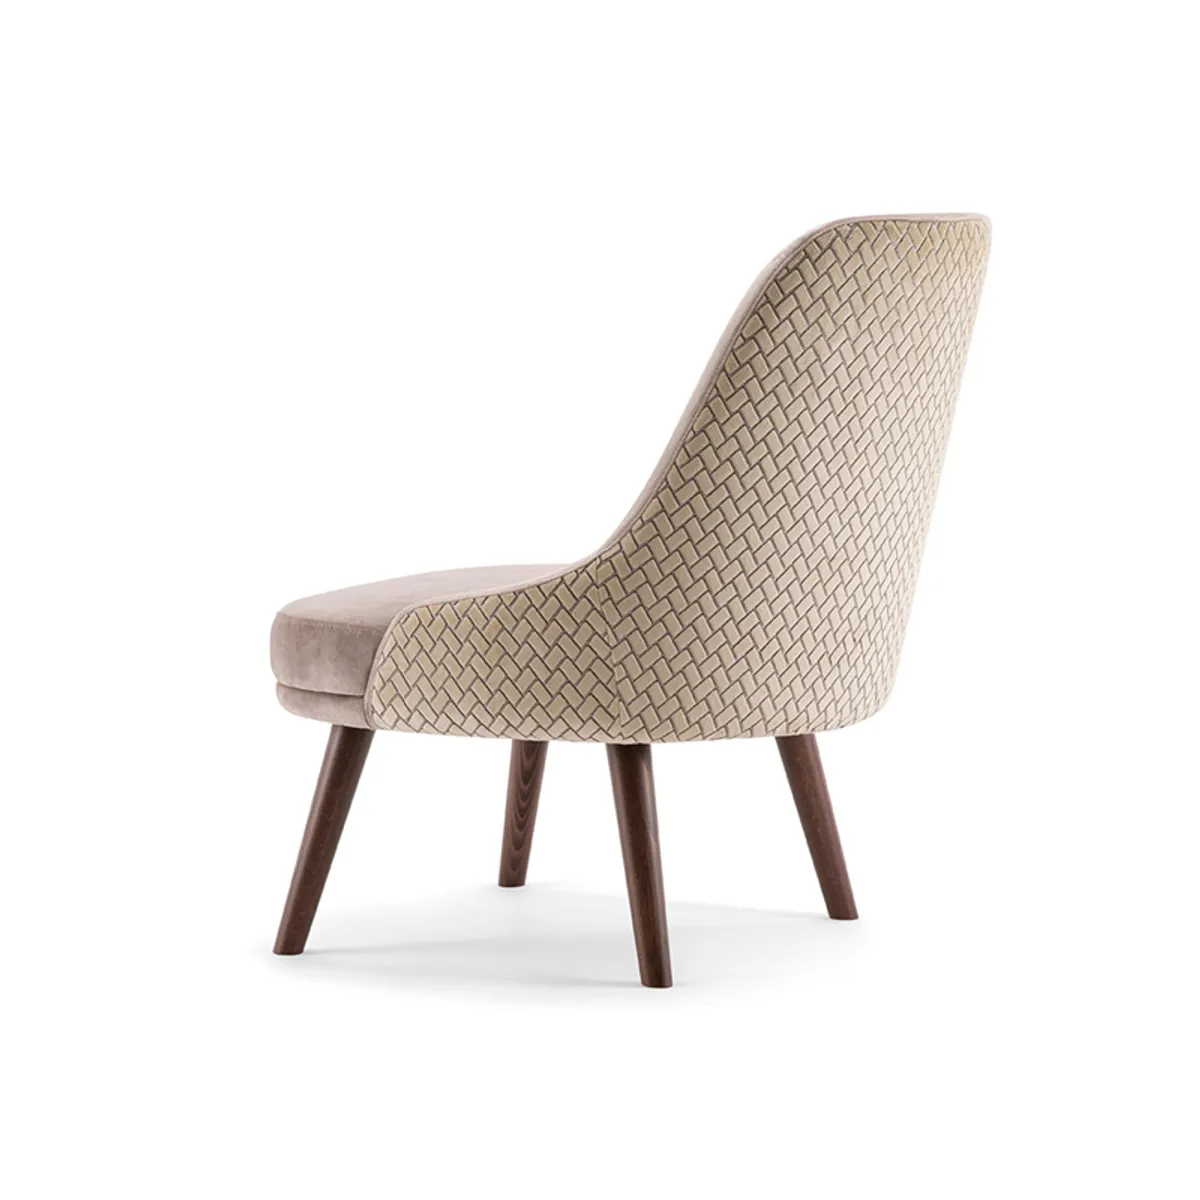 Nandie Lounge Chair Contrast Upholstery And Wooden Legs Insideoutcontracts